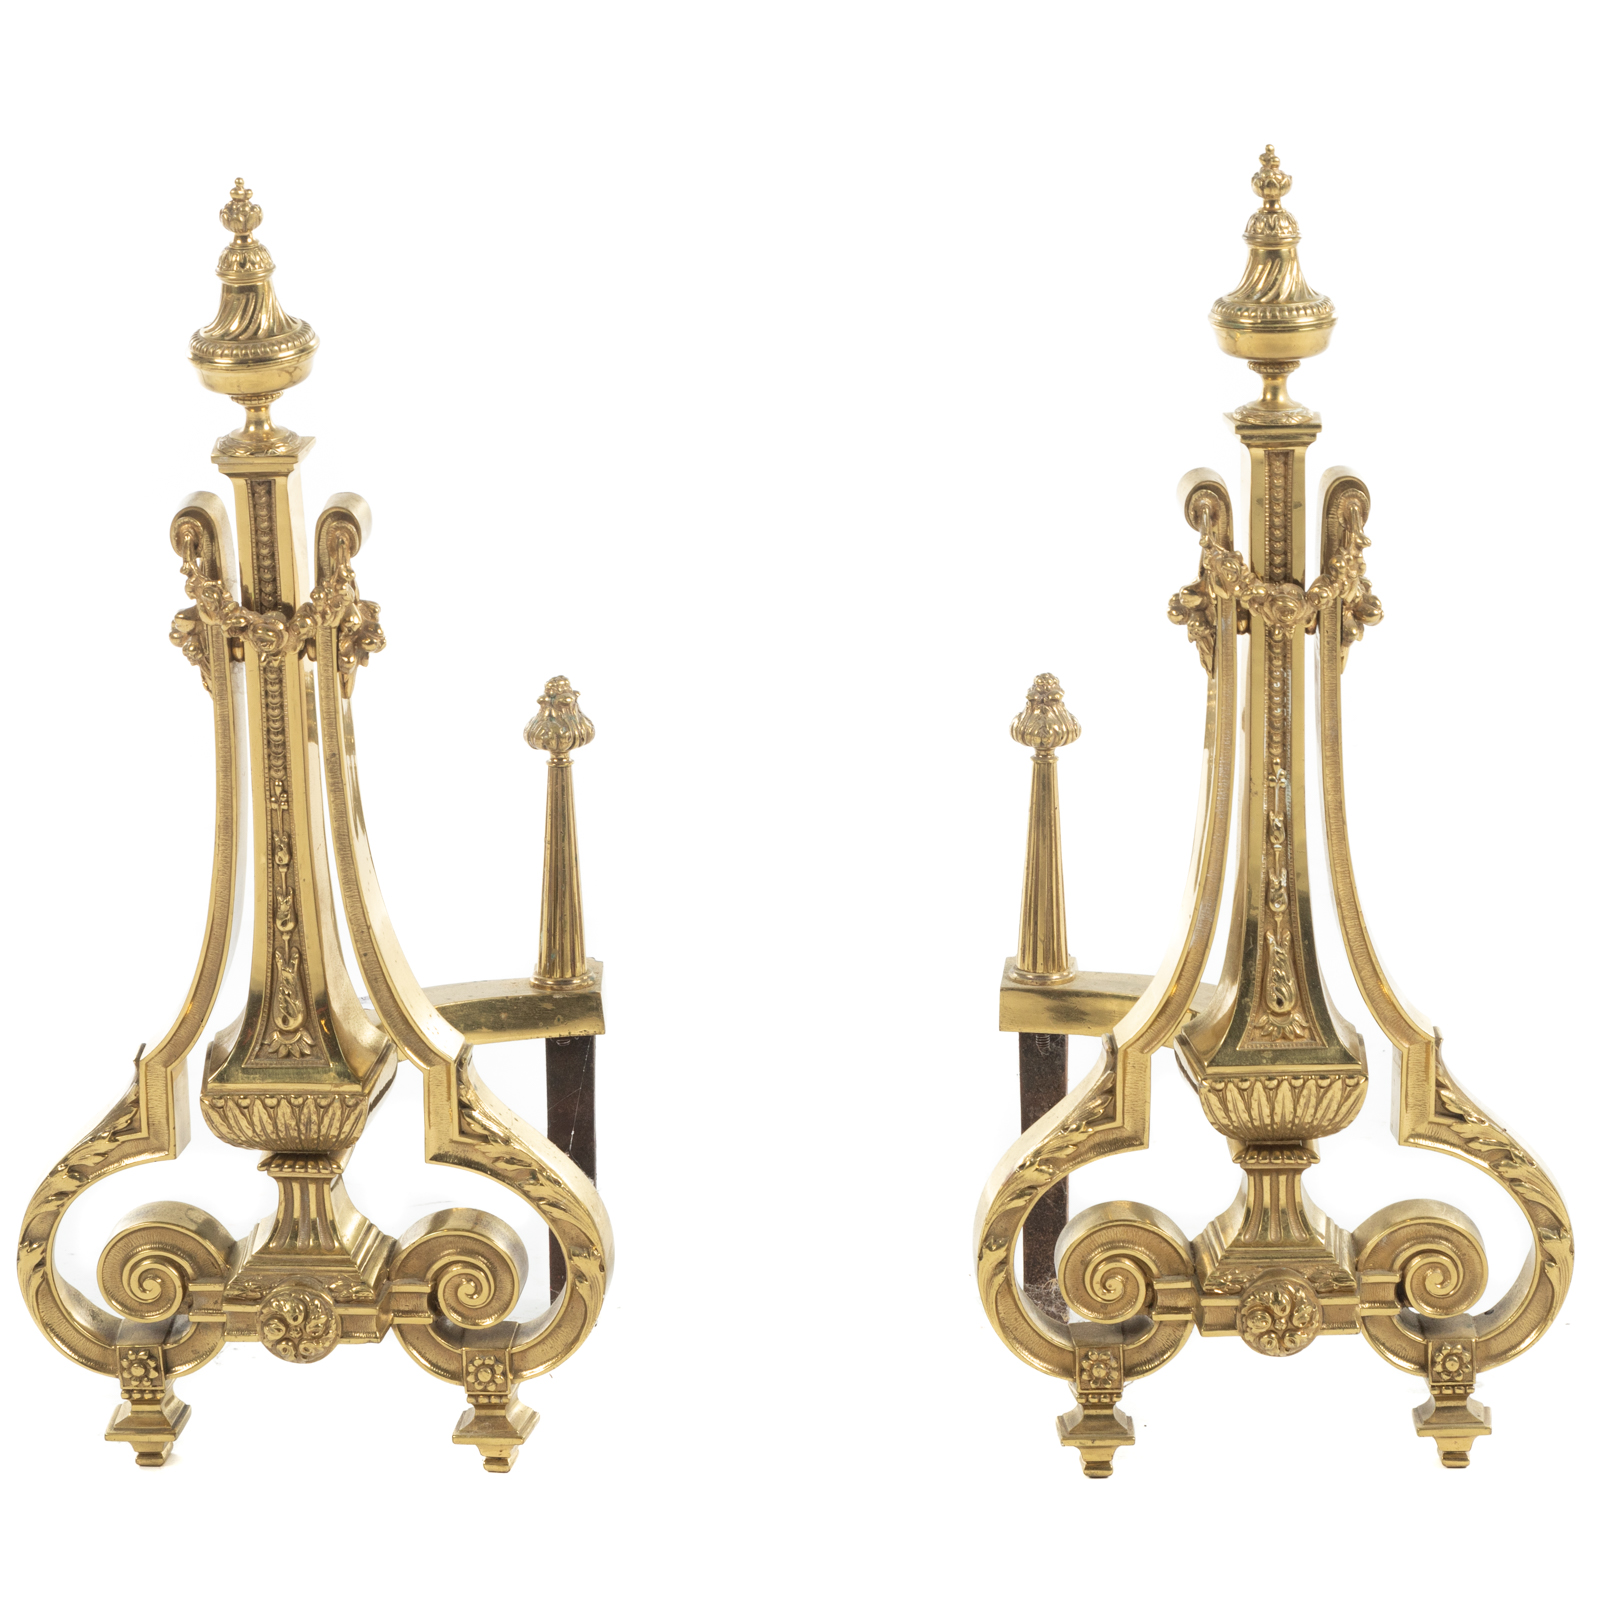 A PAIR OF EMPIRE STYLE BRASS FLAMING